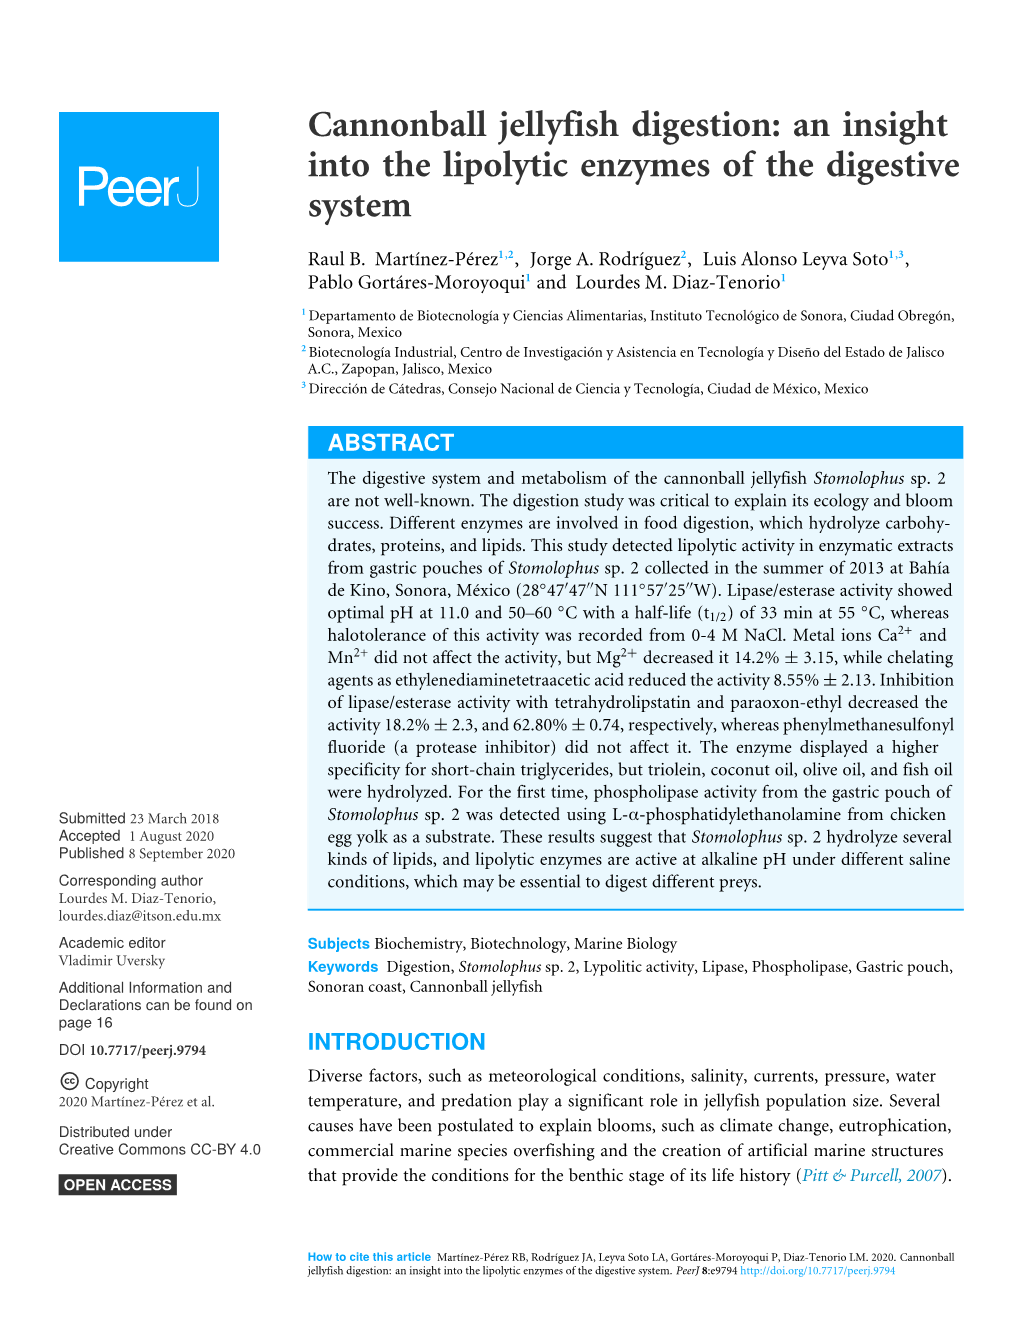 An Insight Into the Lipolytic Enzymes of the Digestive System